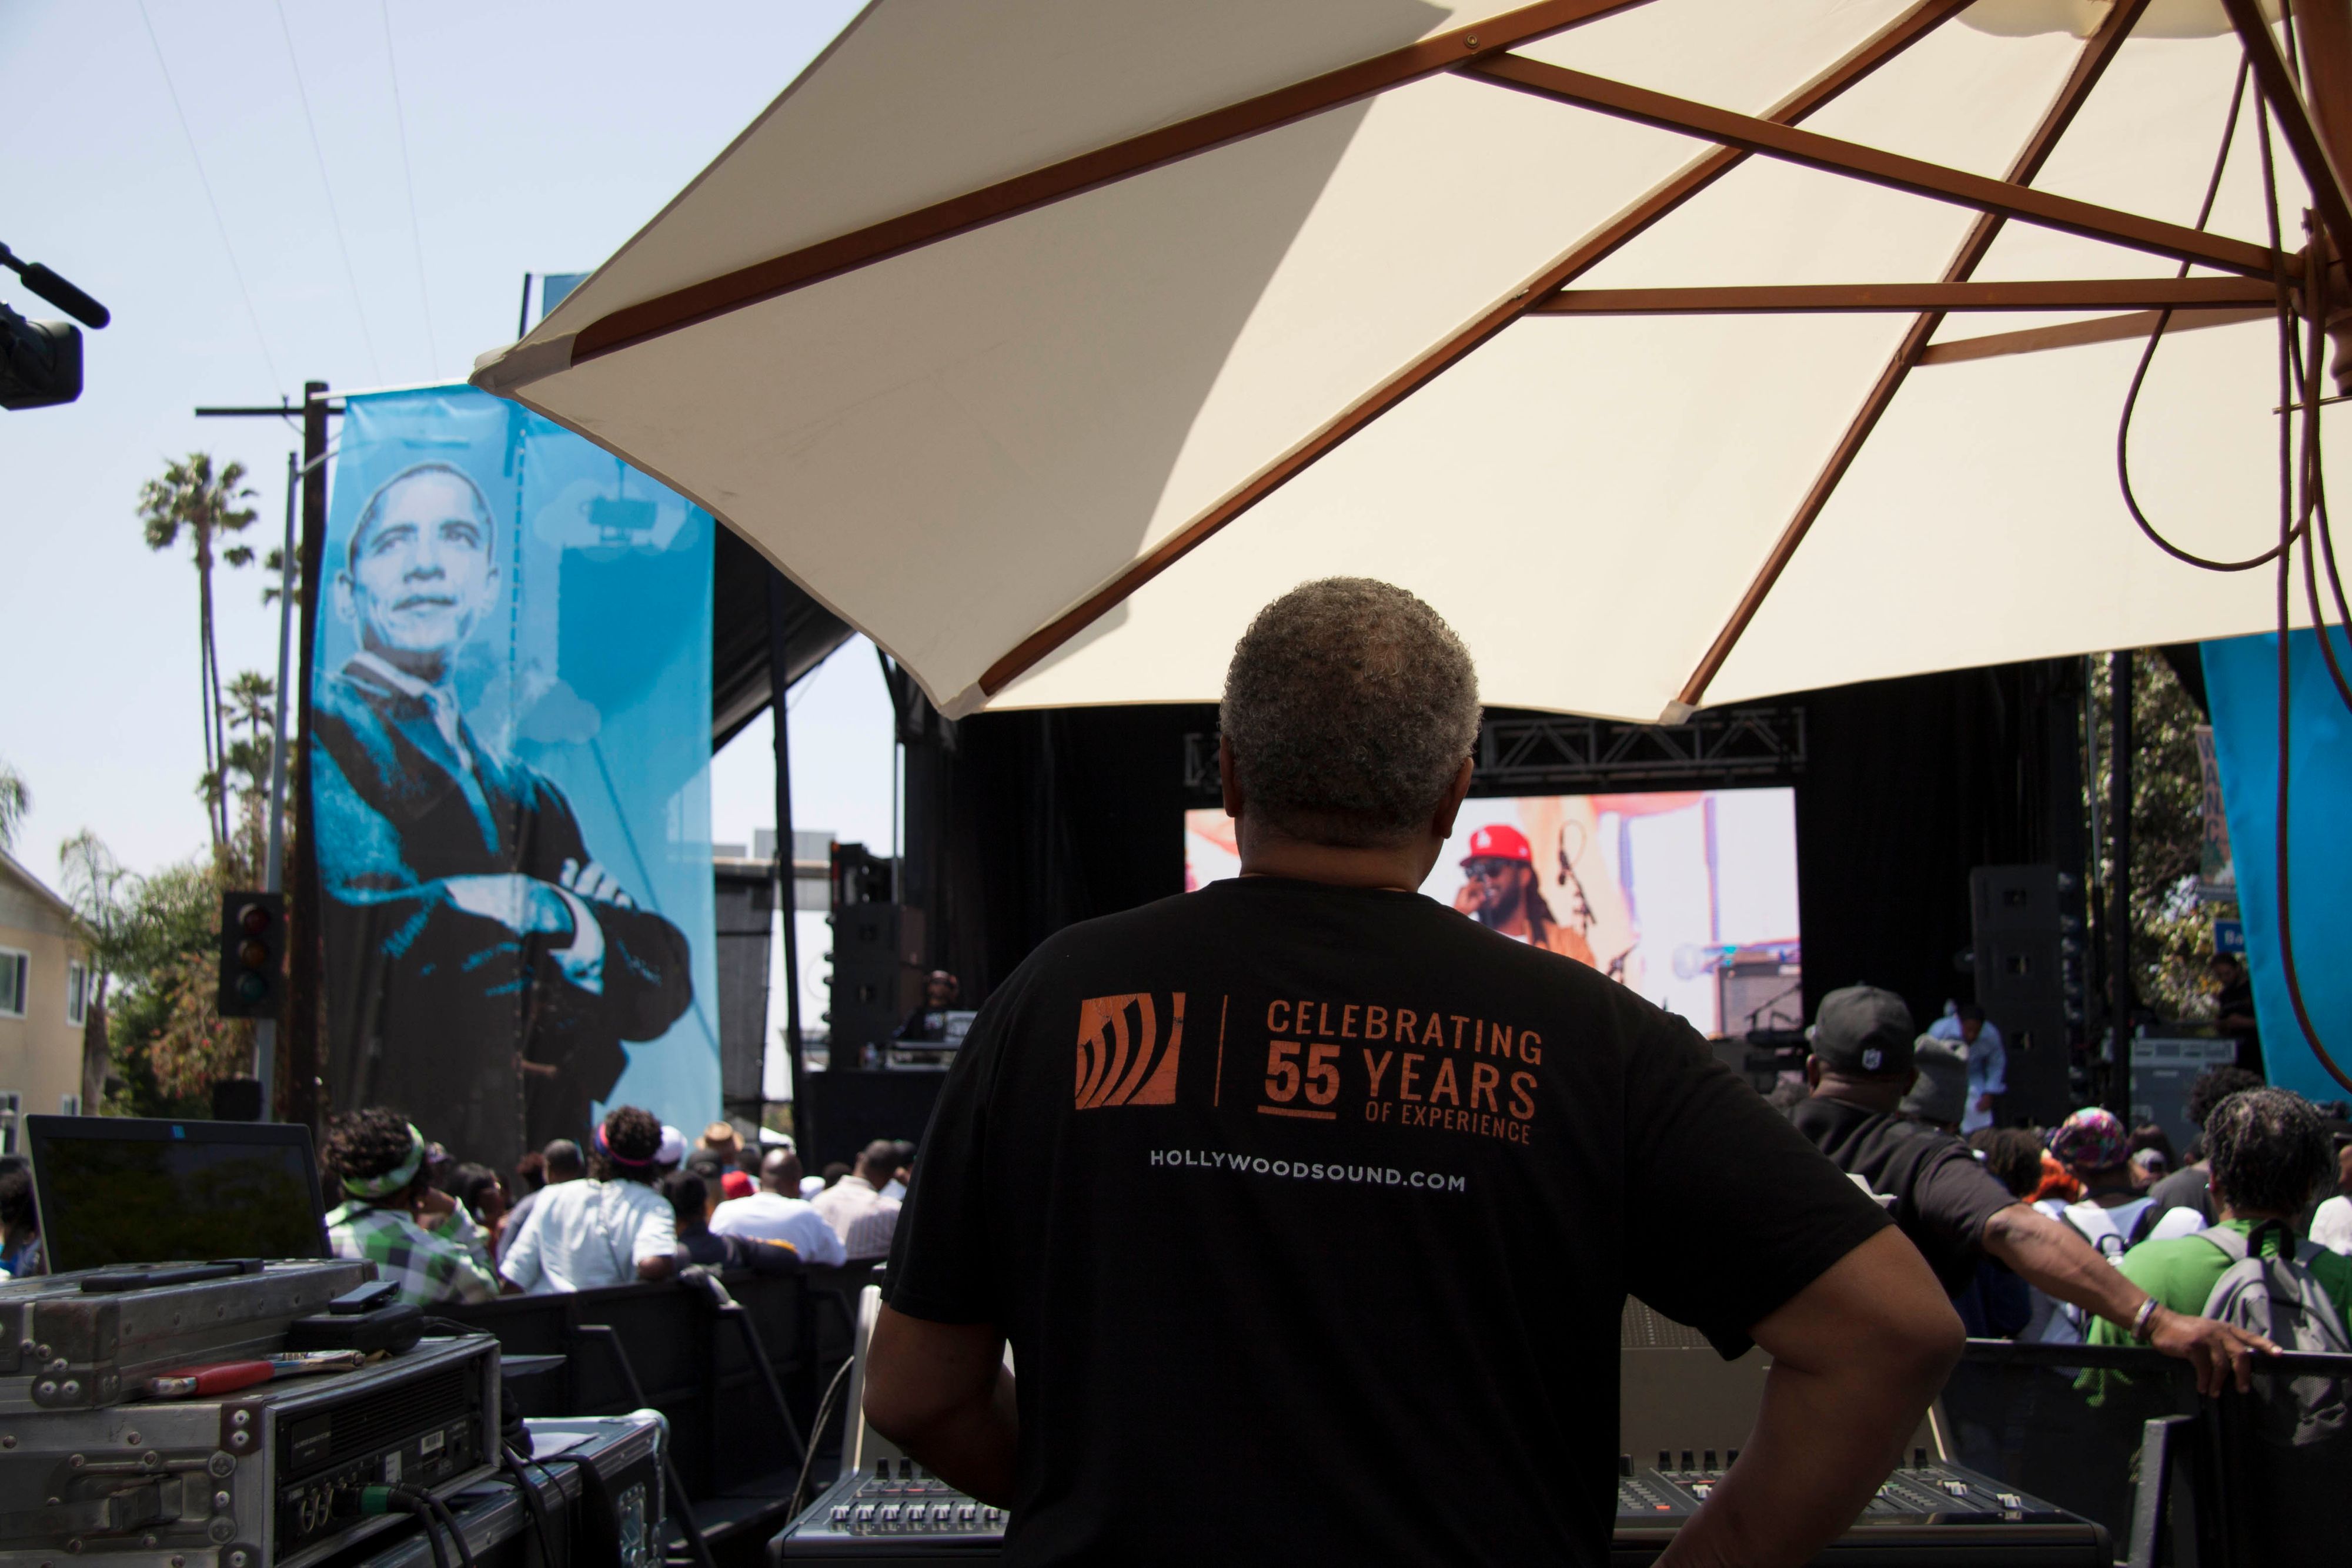 Hollywood Sound Systems at the Obama Blvd renaming ceremony and street festival